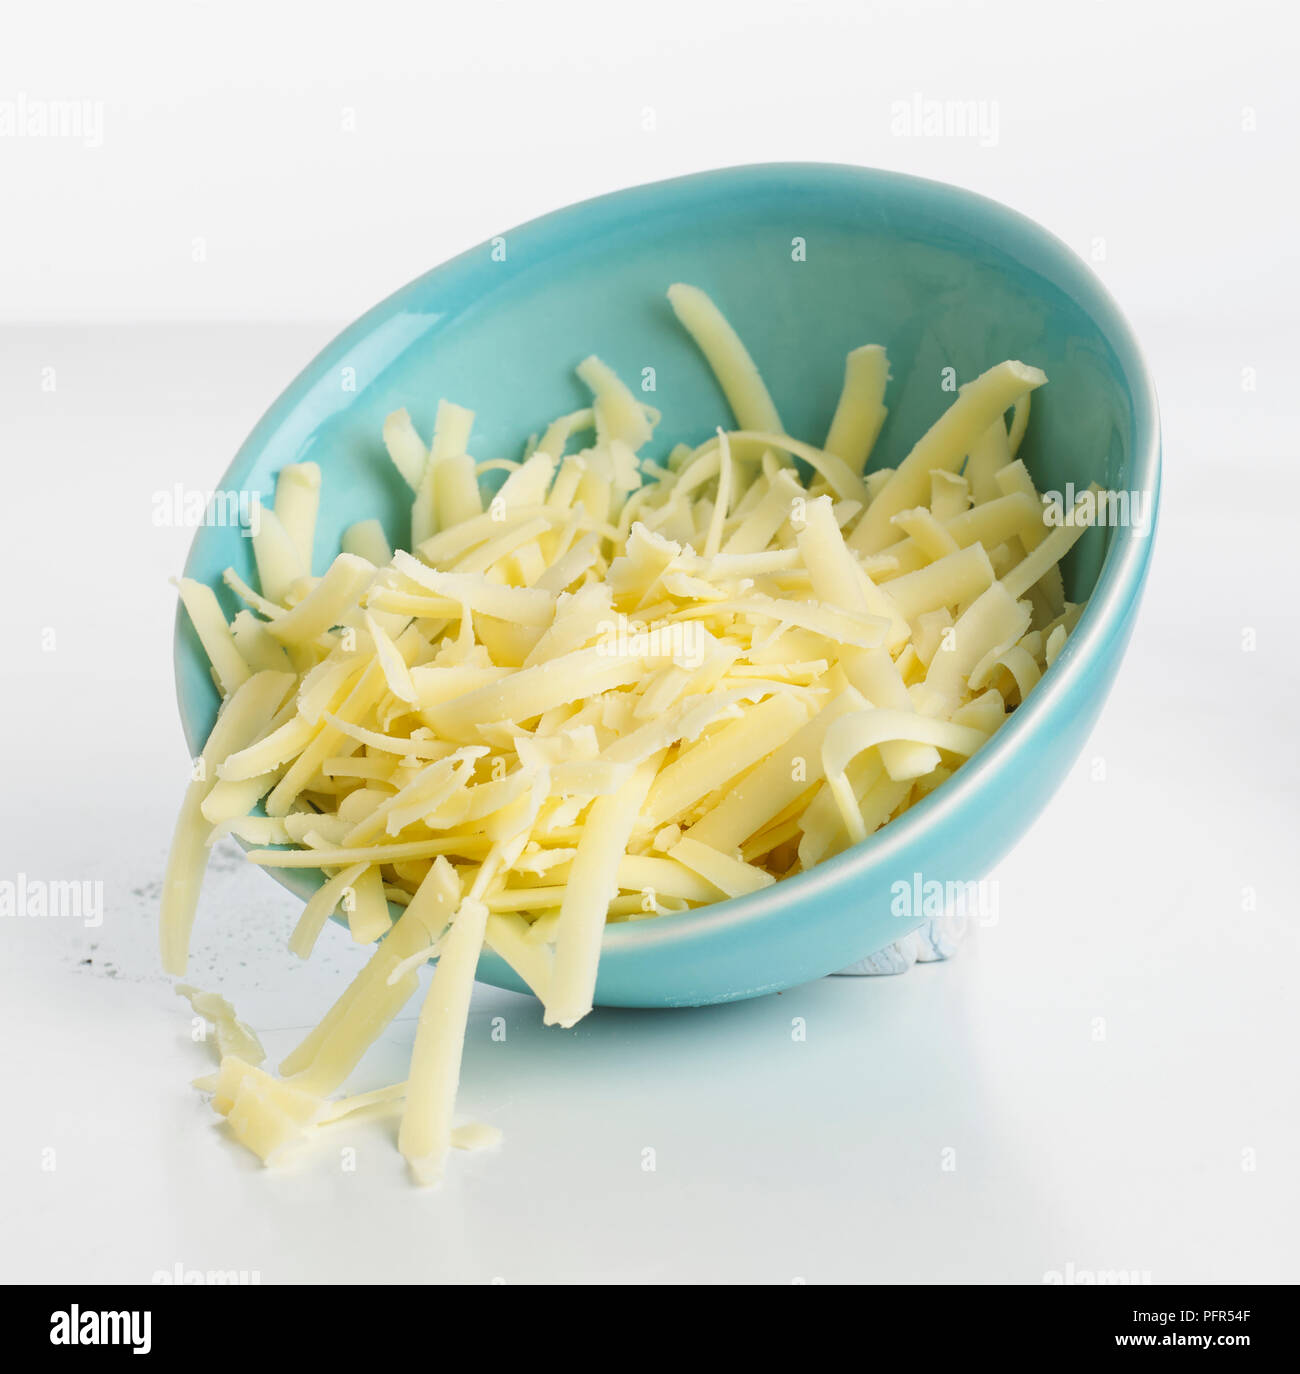 Bowl of grated cheese Stock Photo